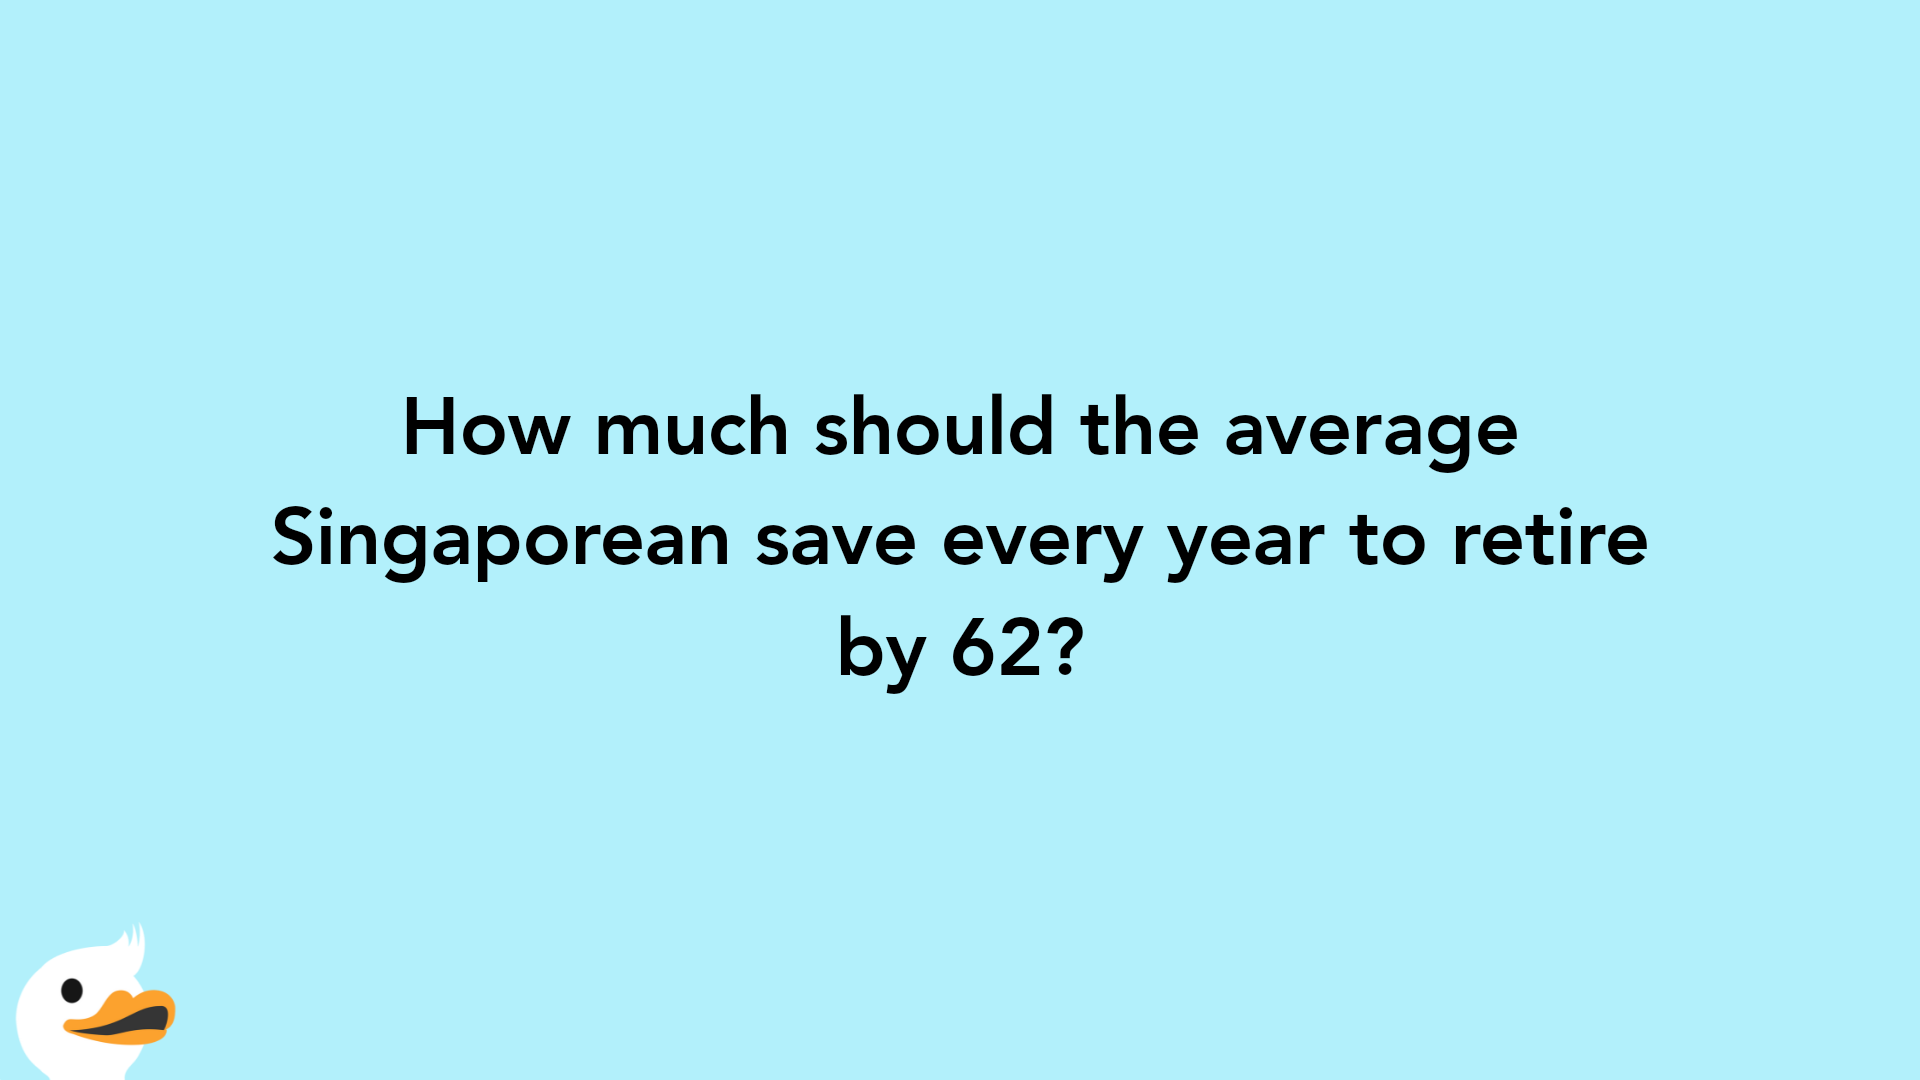 How much should the average Singaporean save every year to retire by 62?